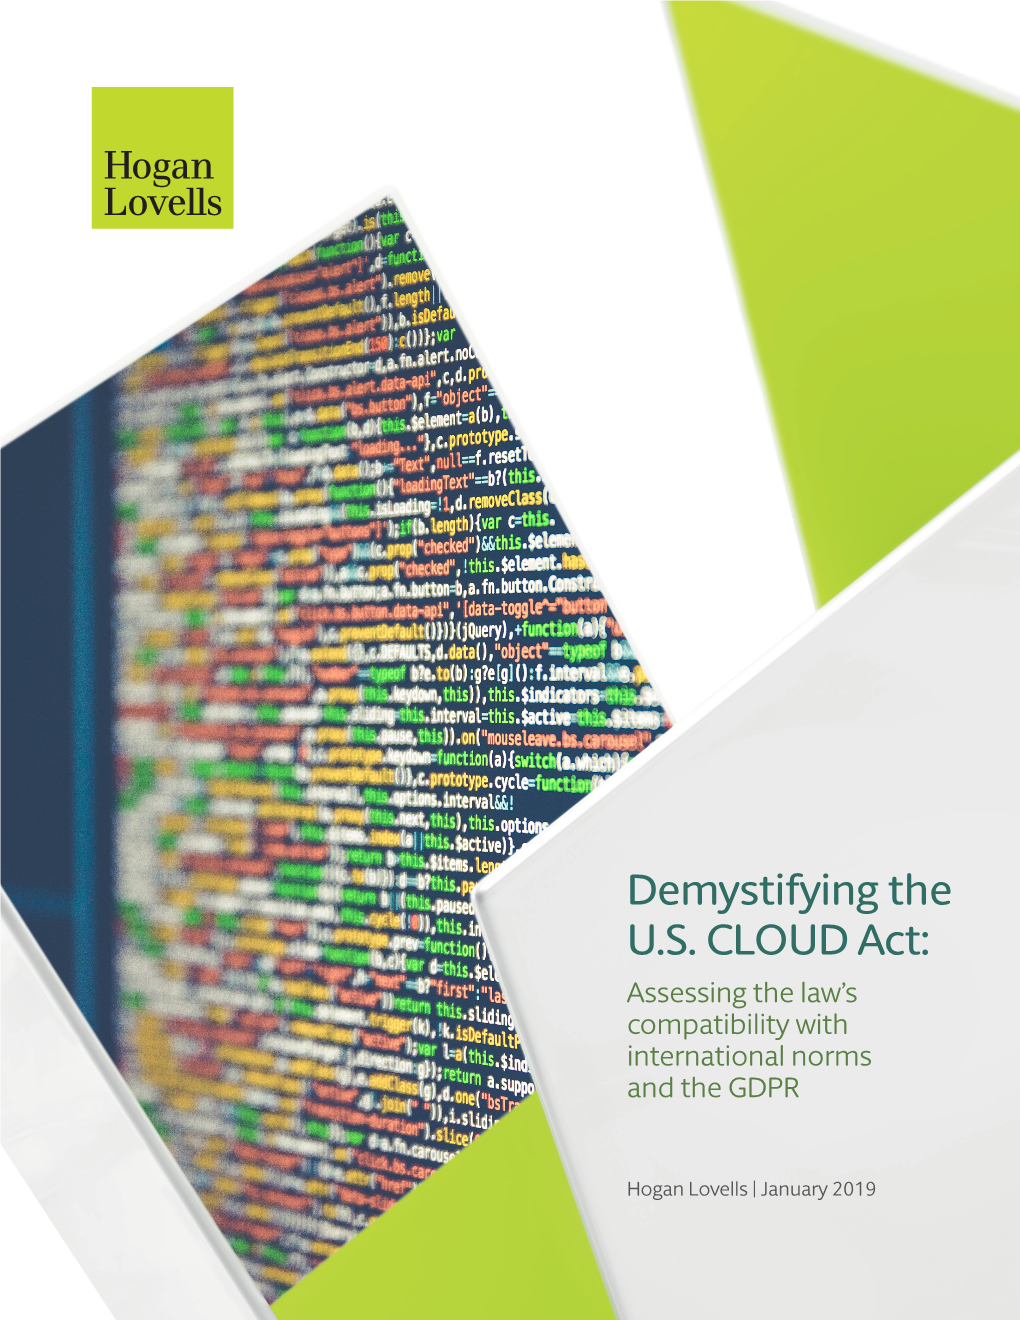 Demystifying the U.S. CLOUD Act: Assessing the Law’S Compatibility with International Norms and the GDPR